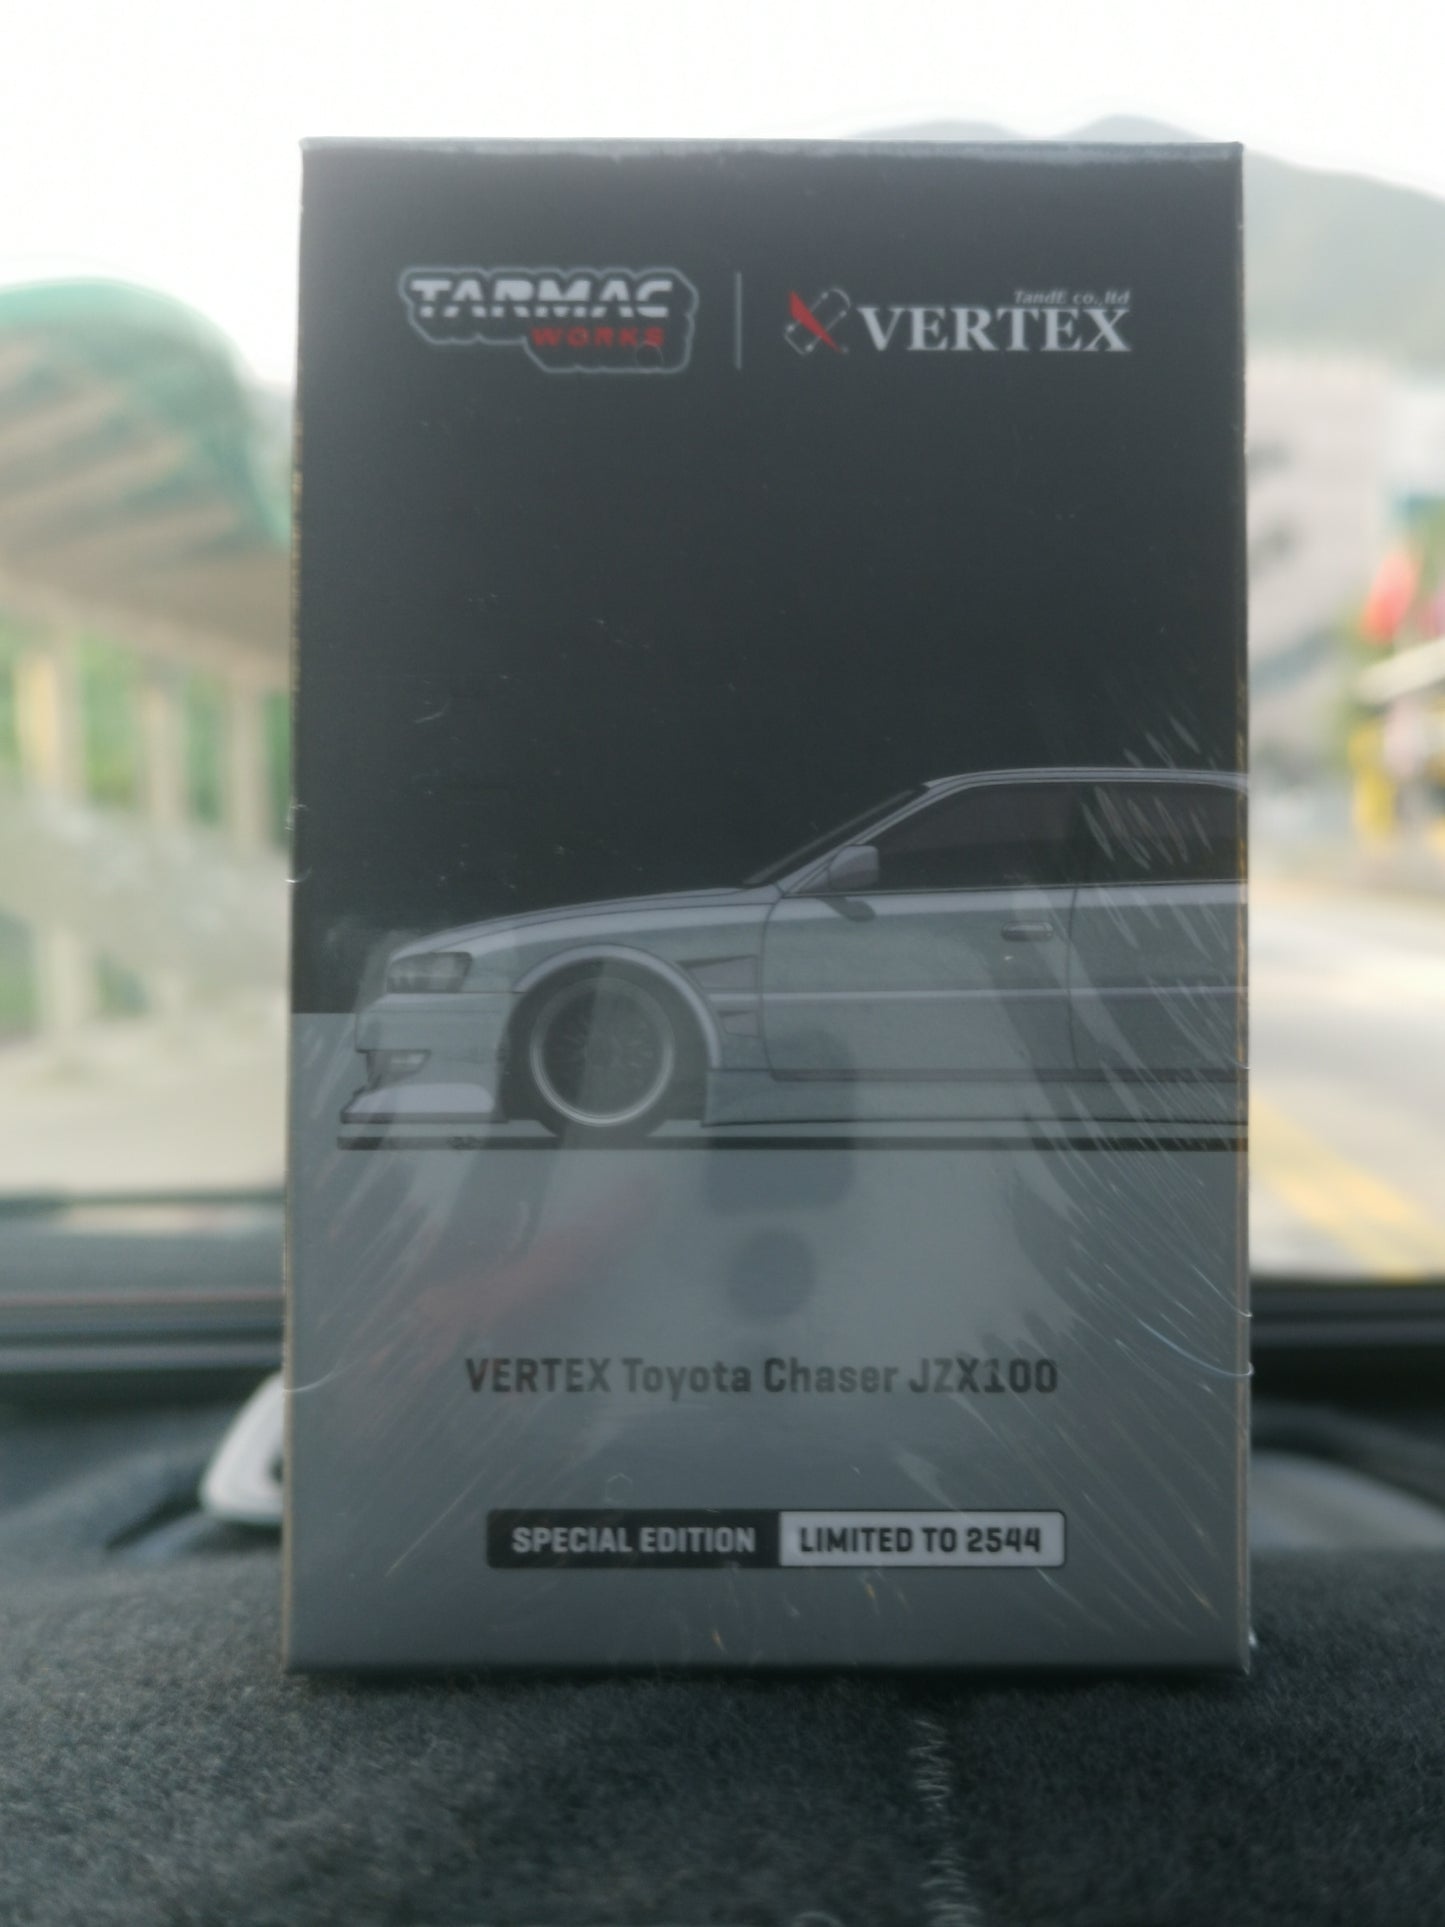 Tarmac Works VERTEX Toyota Chaser JZX100 Silver Metallic, Special Edition